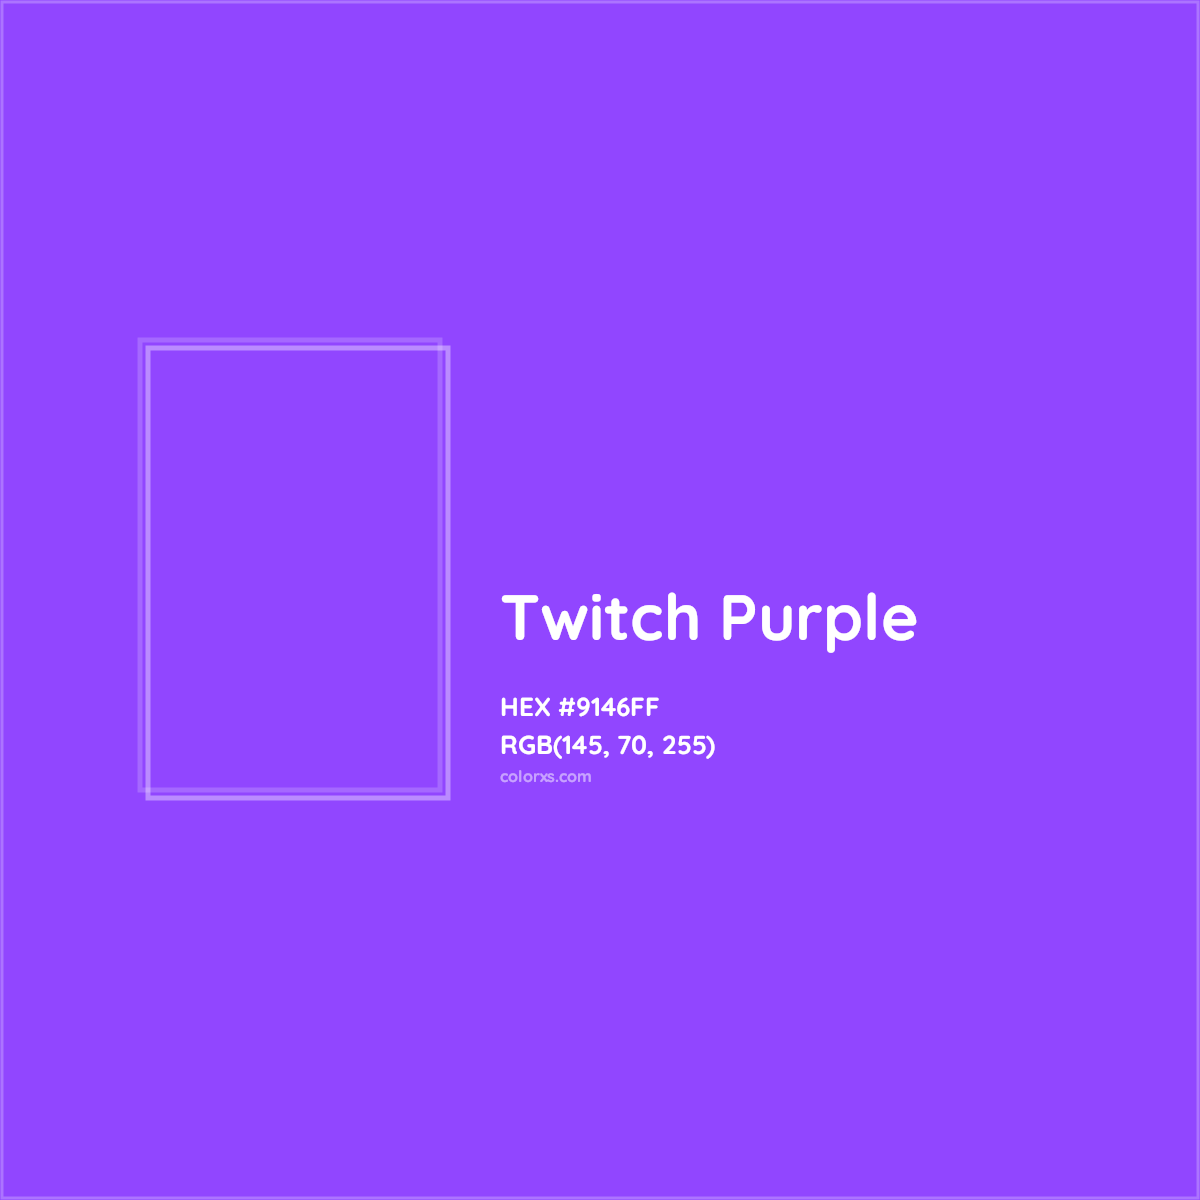 HEX #9146FF Twitch Purple Other Brand - Color Code